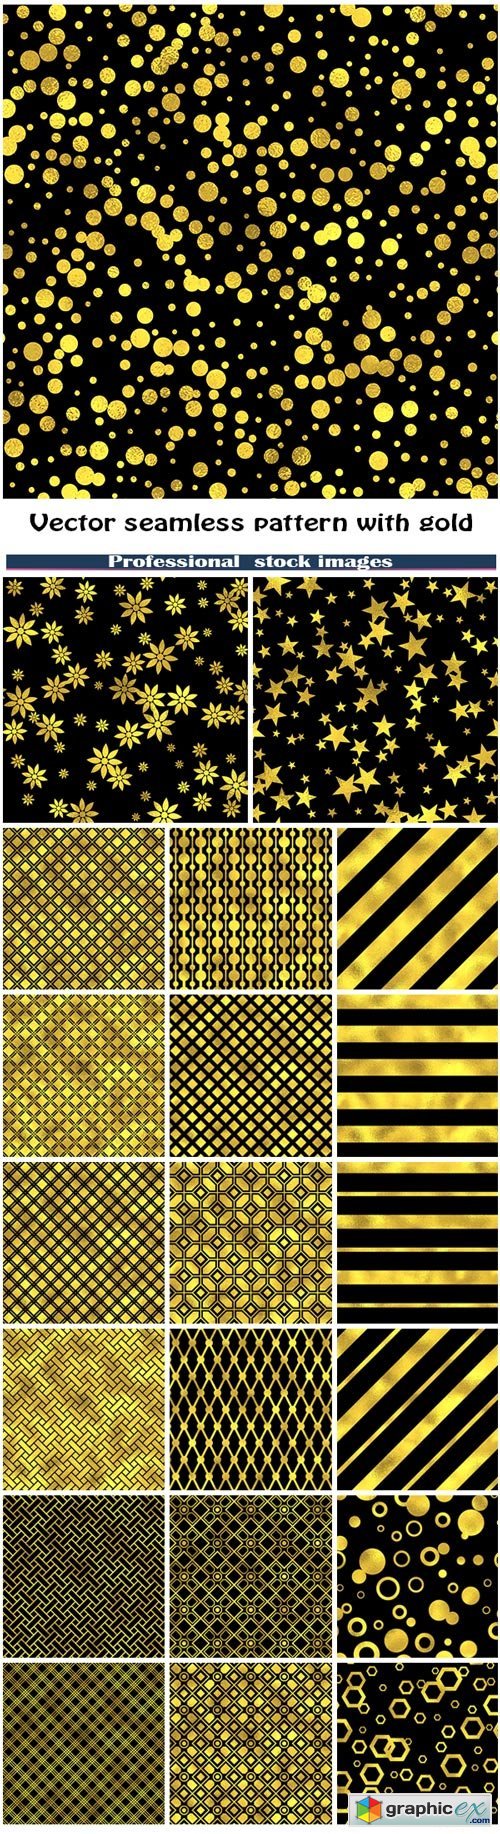 Seamless pattern with gold